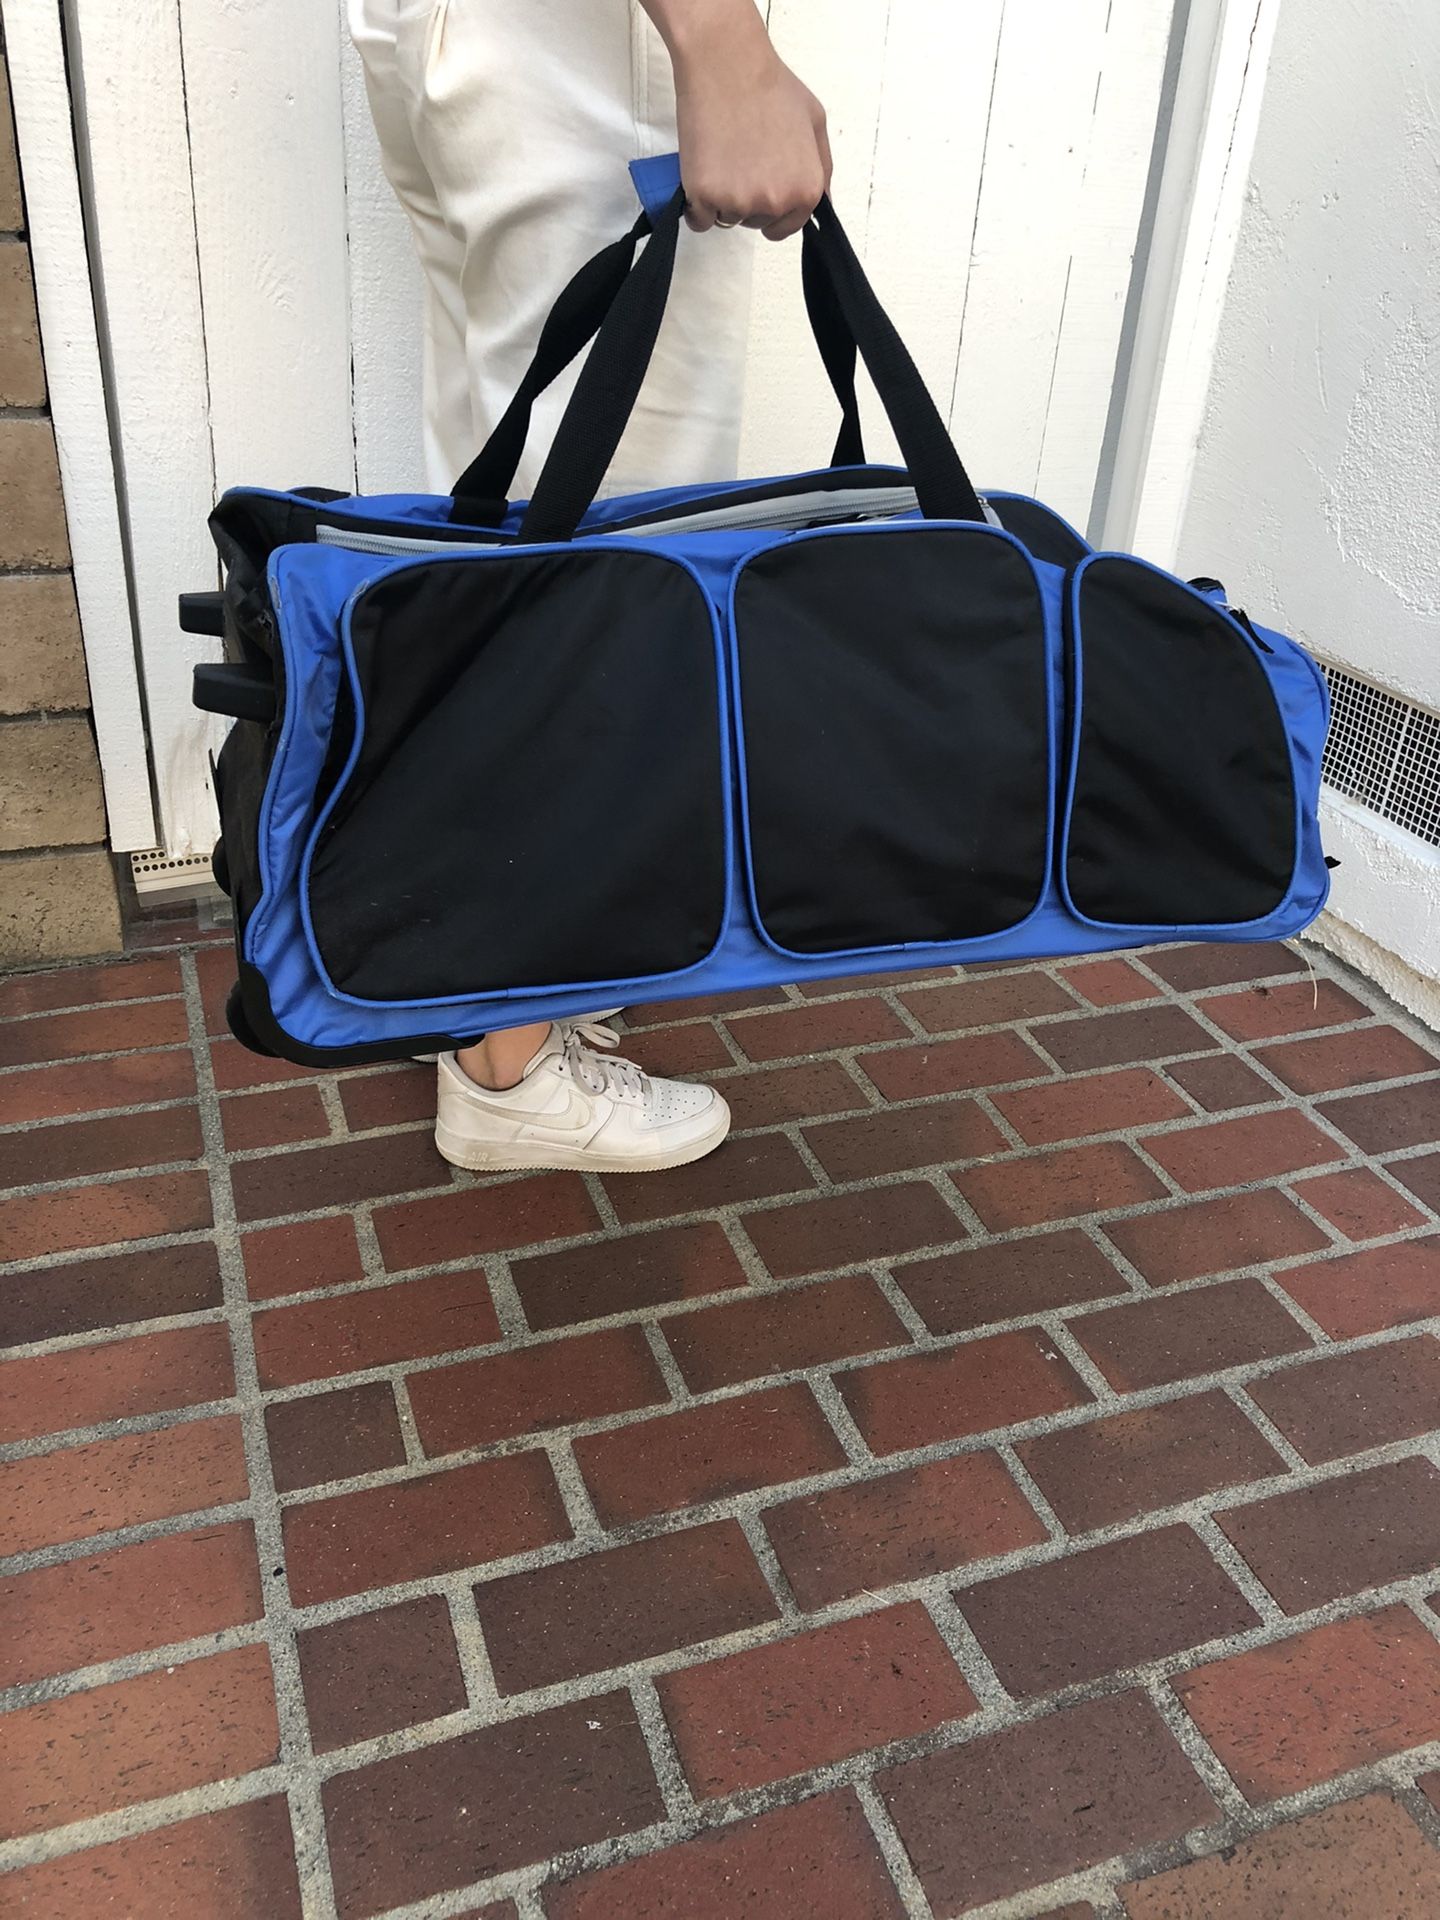 Rolling duffle bag / luggage - approx 28” long